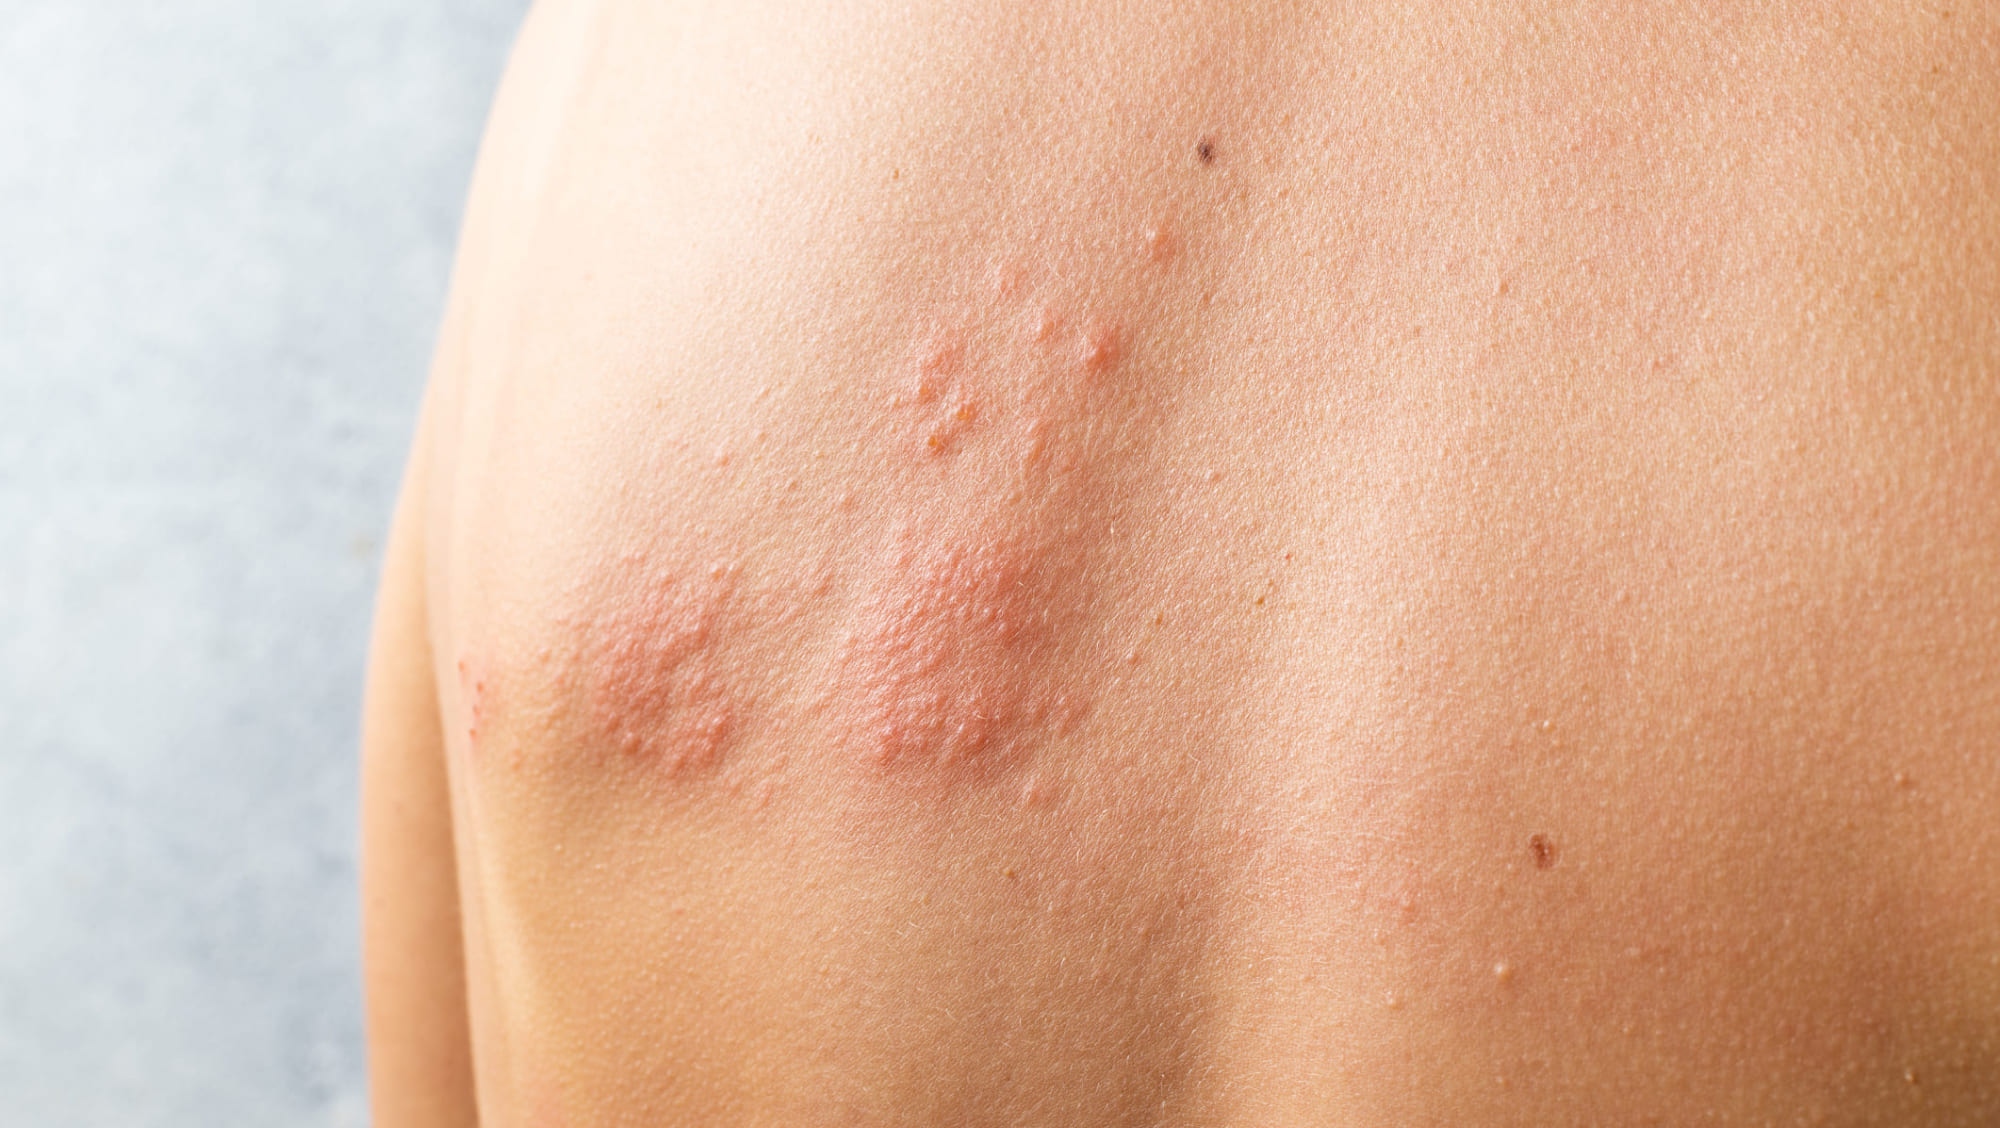 Shingles Recurrence: What You Need To Know